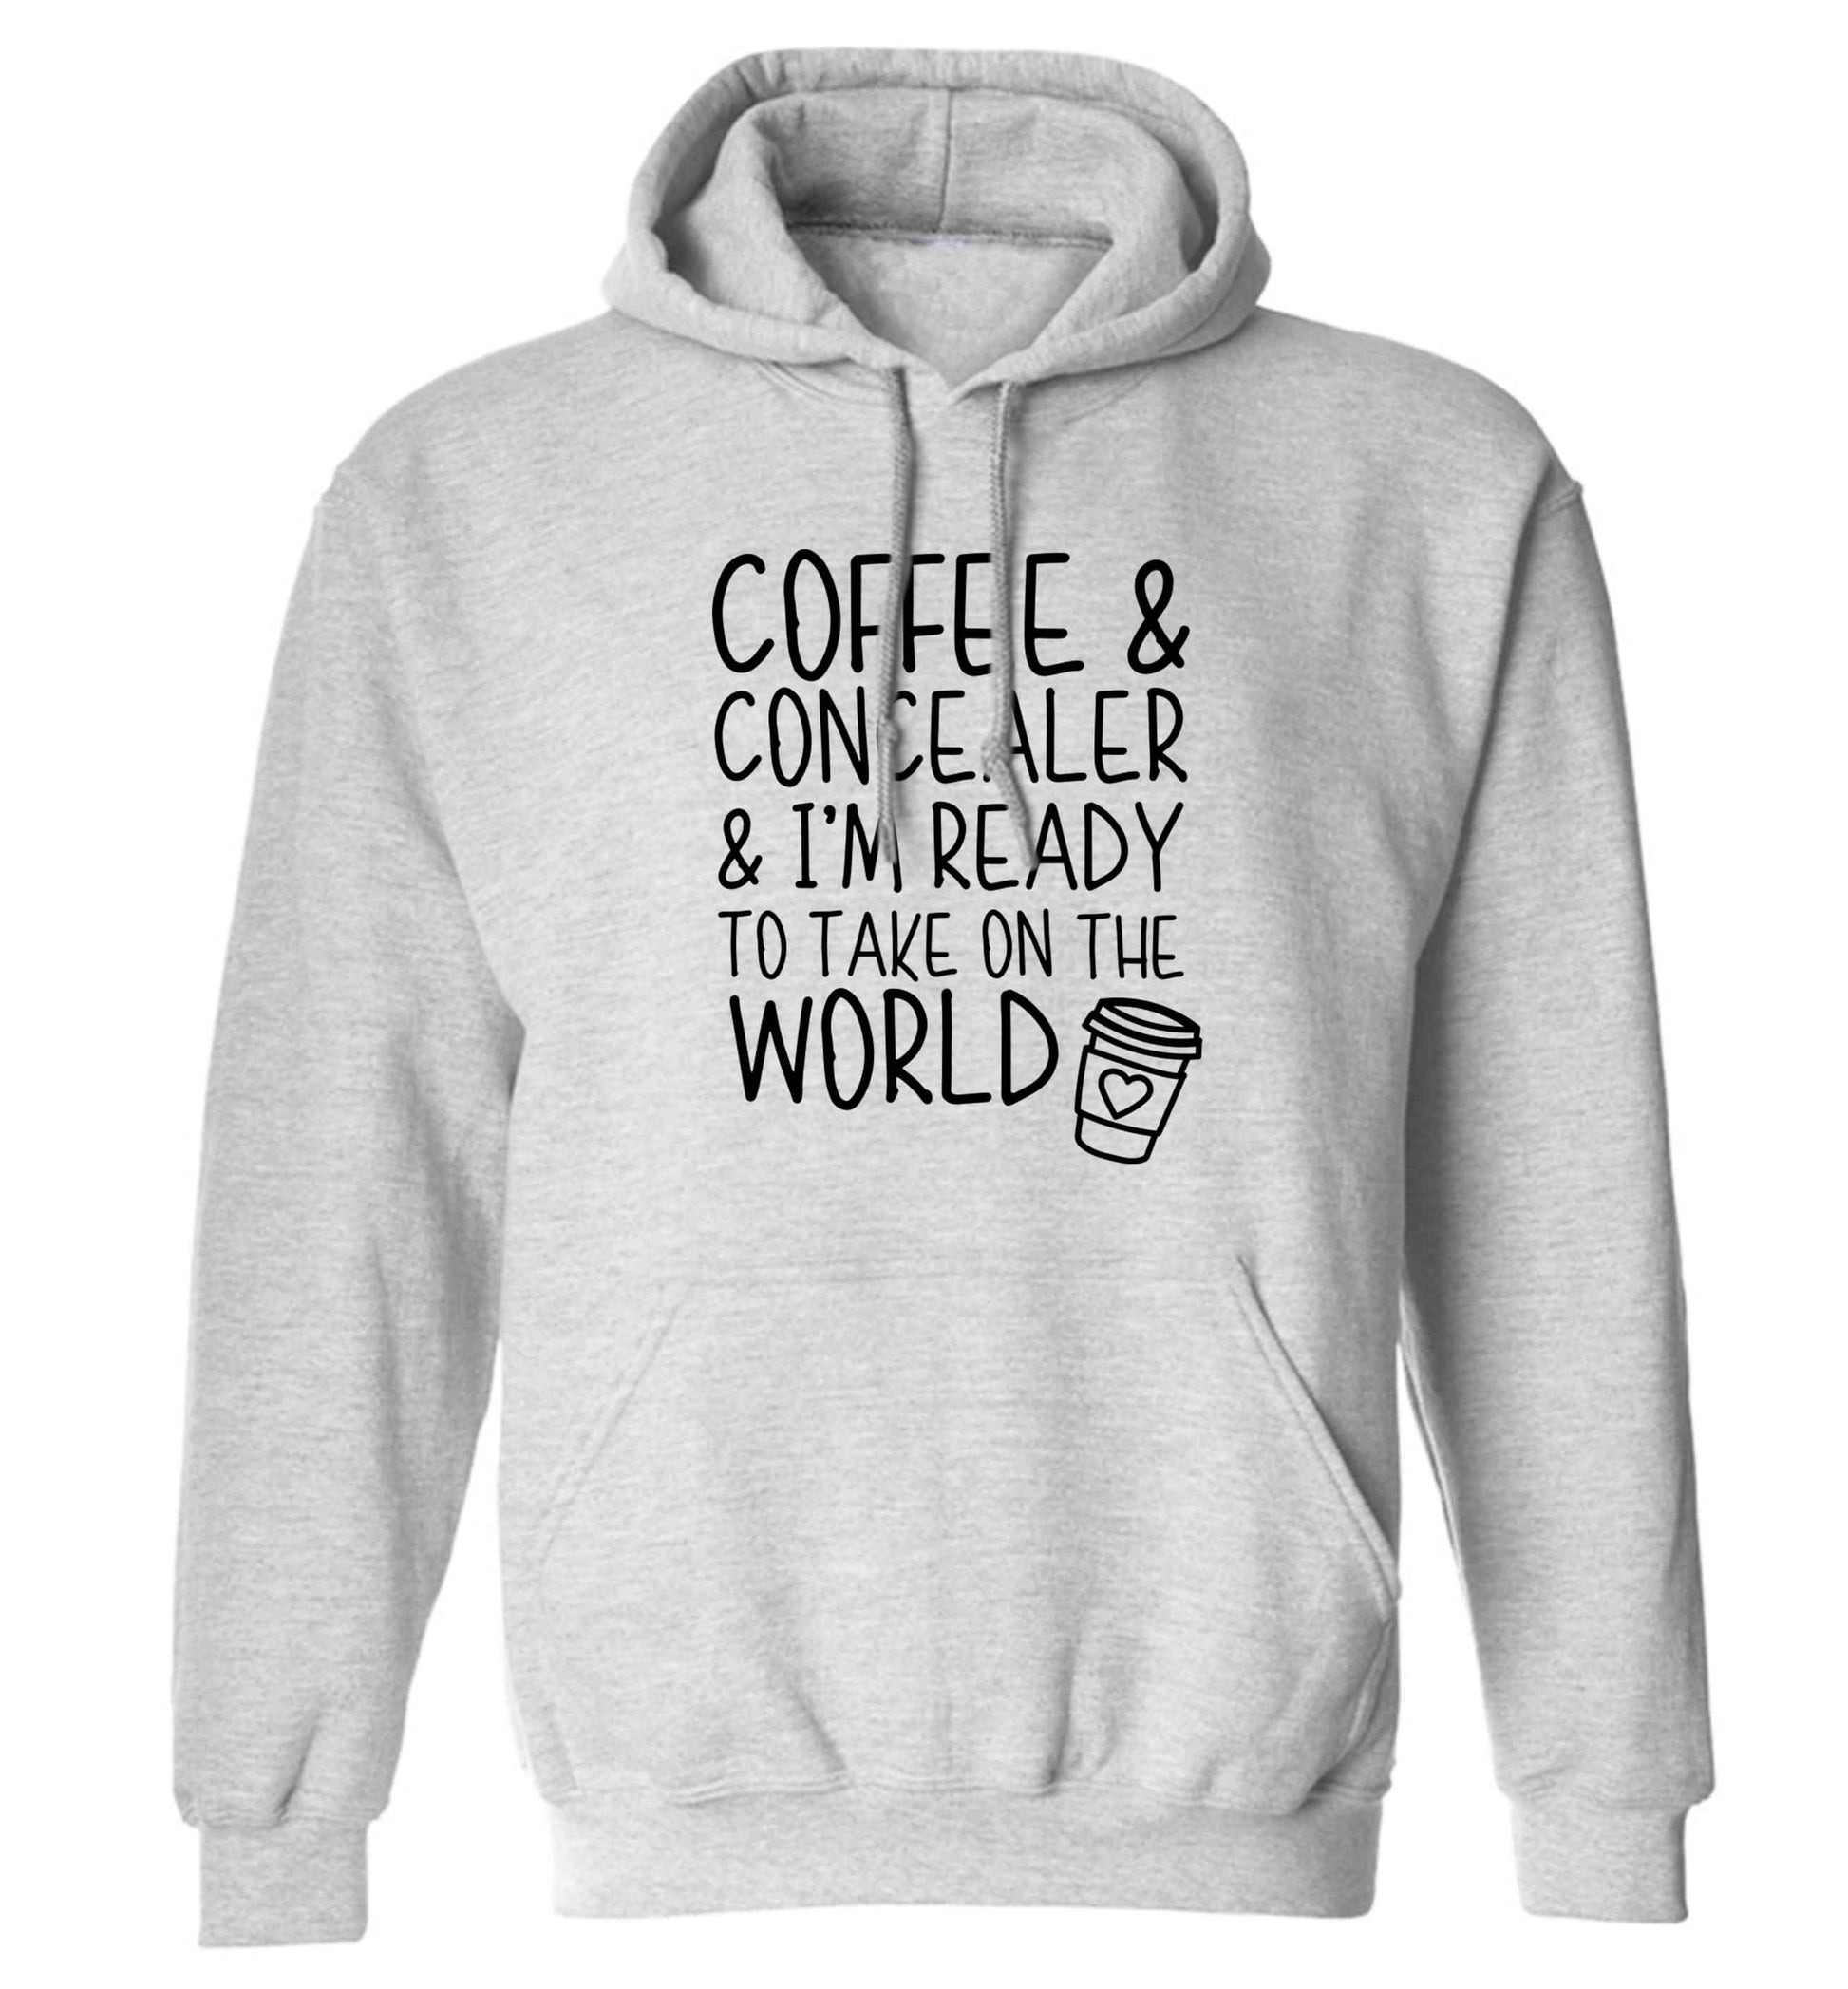 Coffee and concealer and I'm ready to take on the world adults unisex grey hoodie 2XL